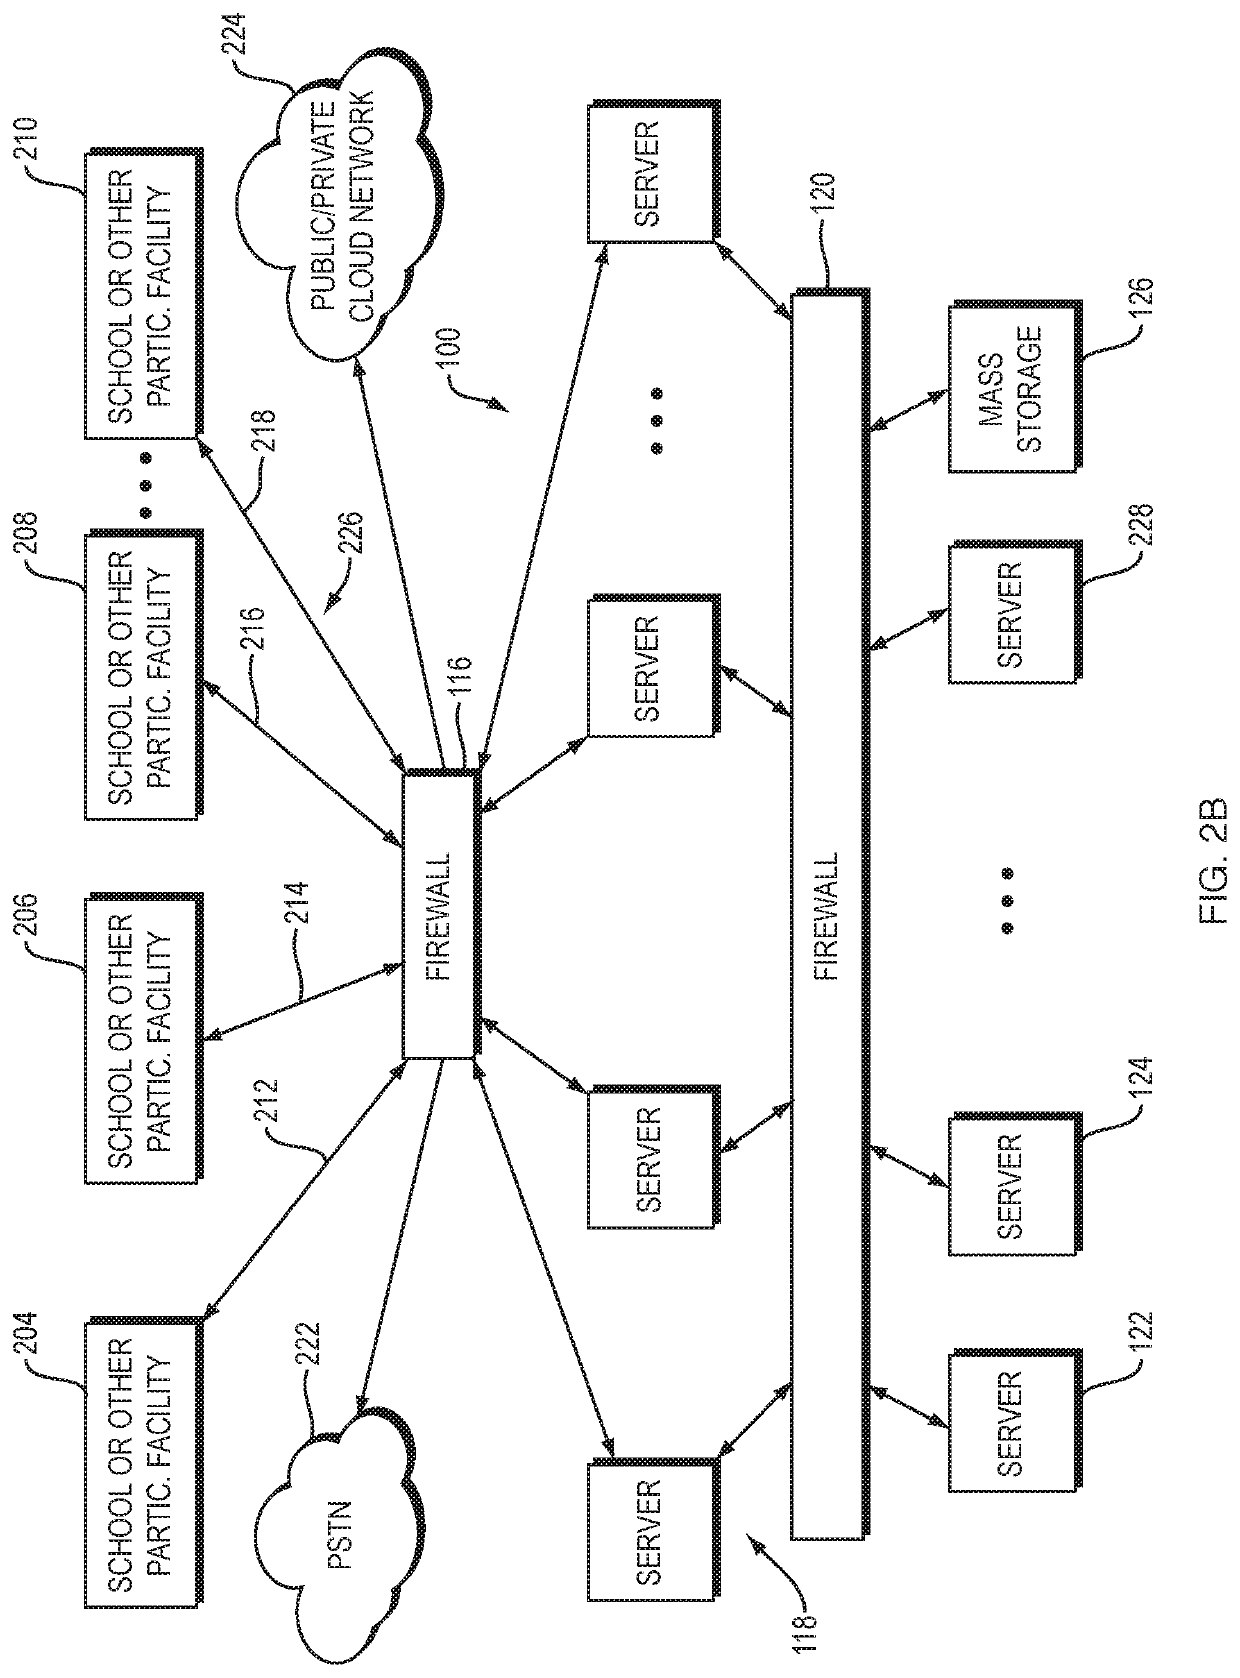 System and methods for managing health-related information for a population